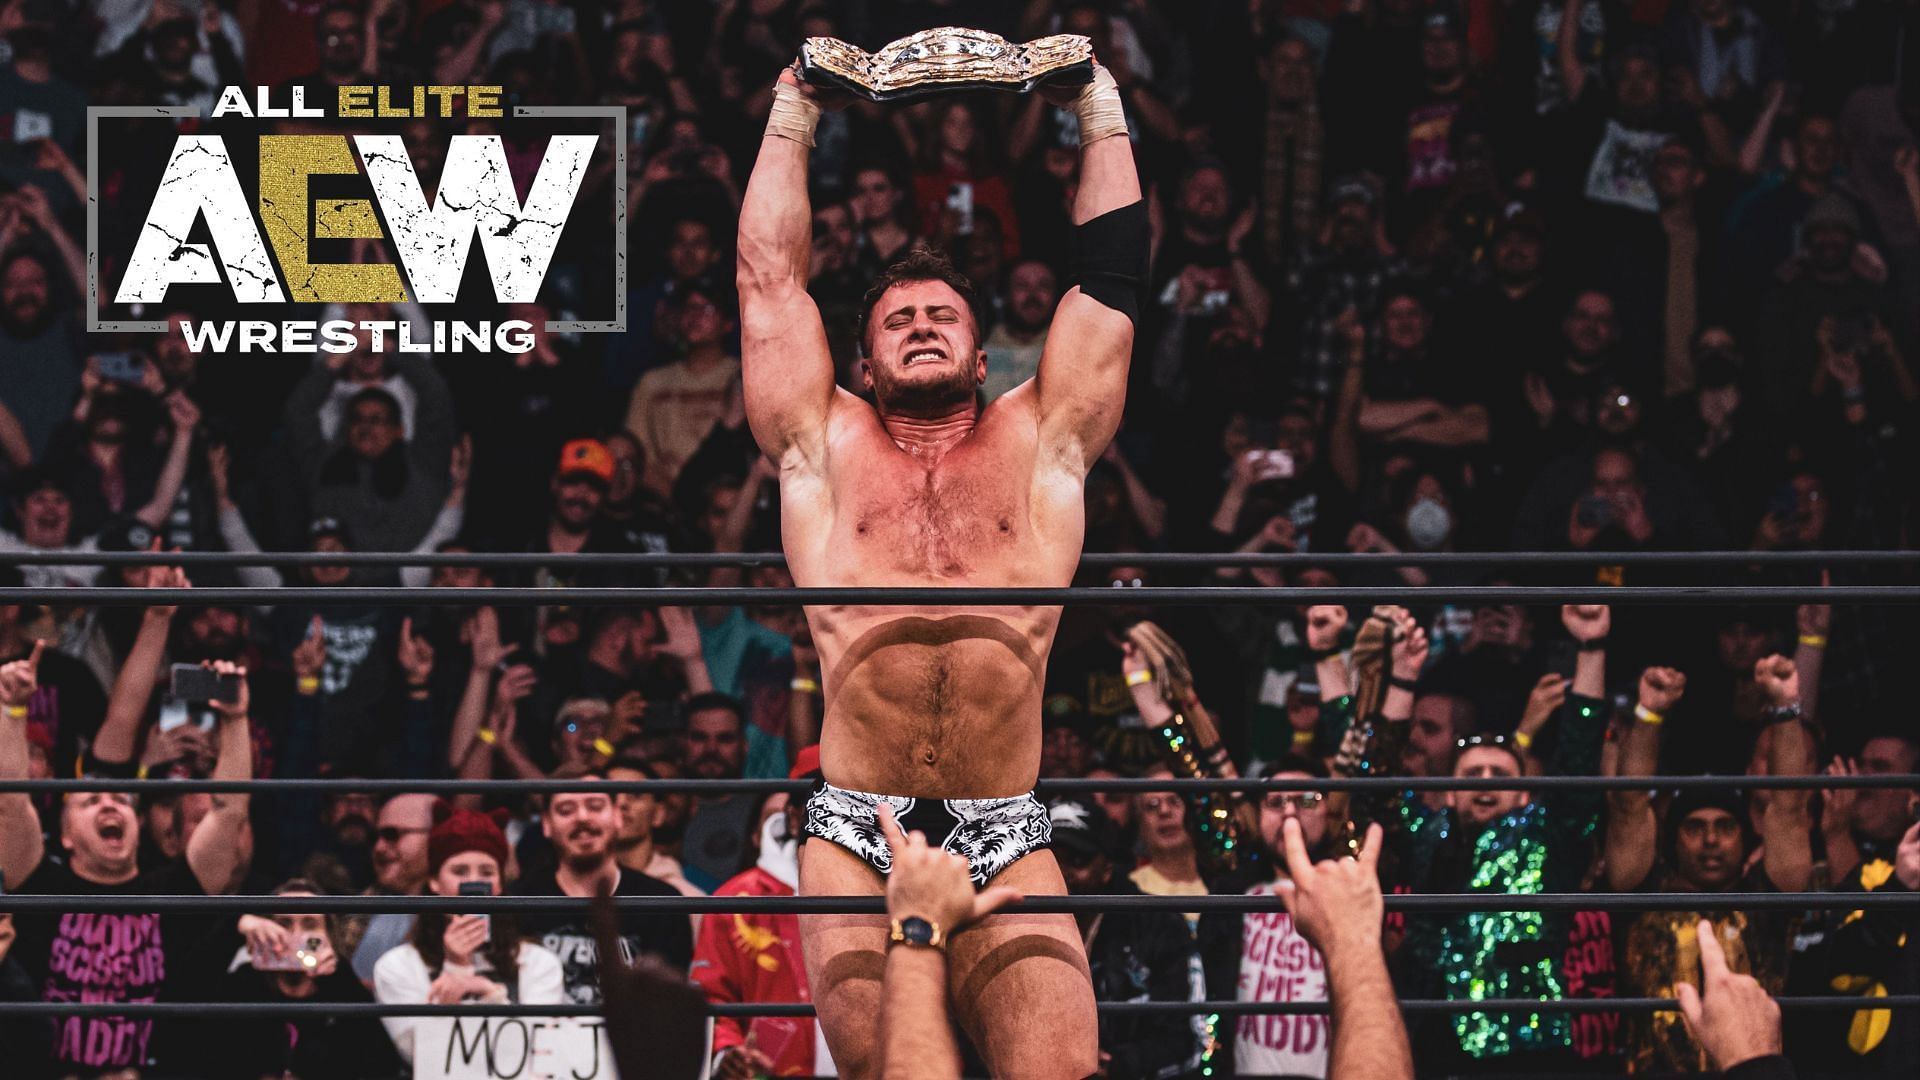 MJF recently became the AEW World Champion